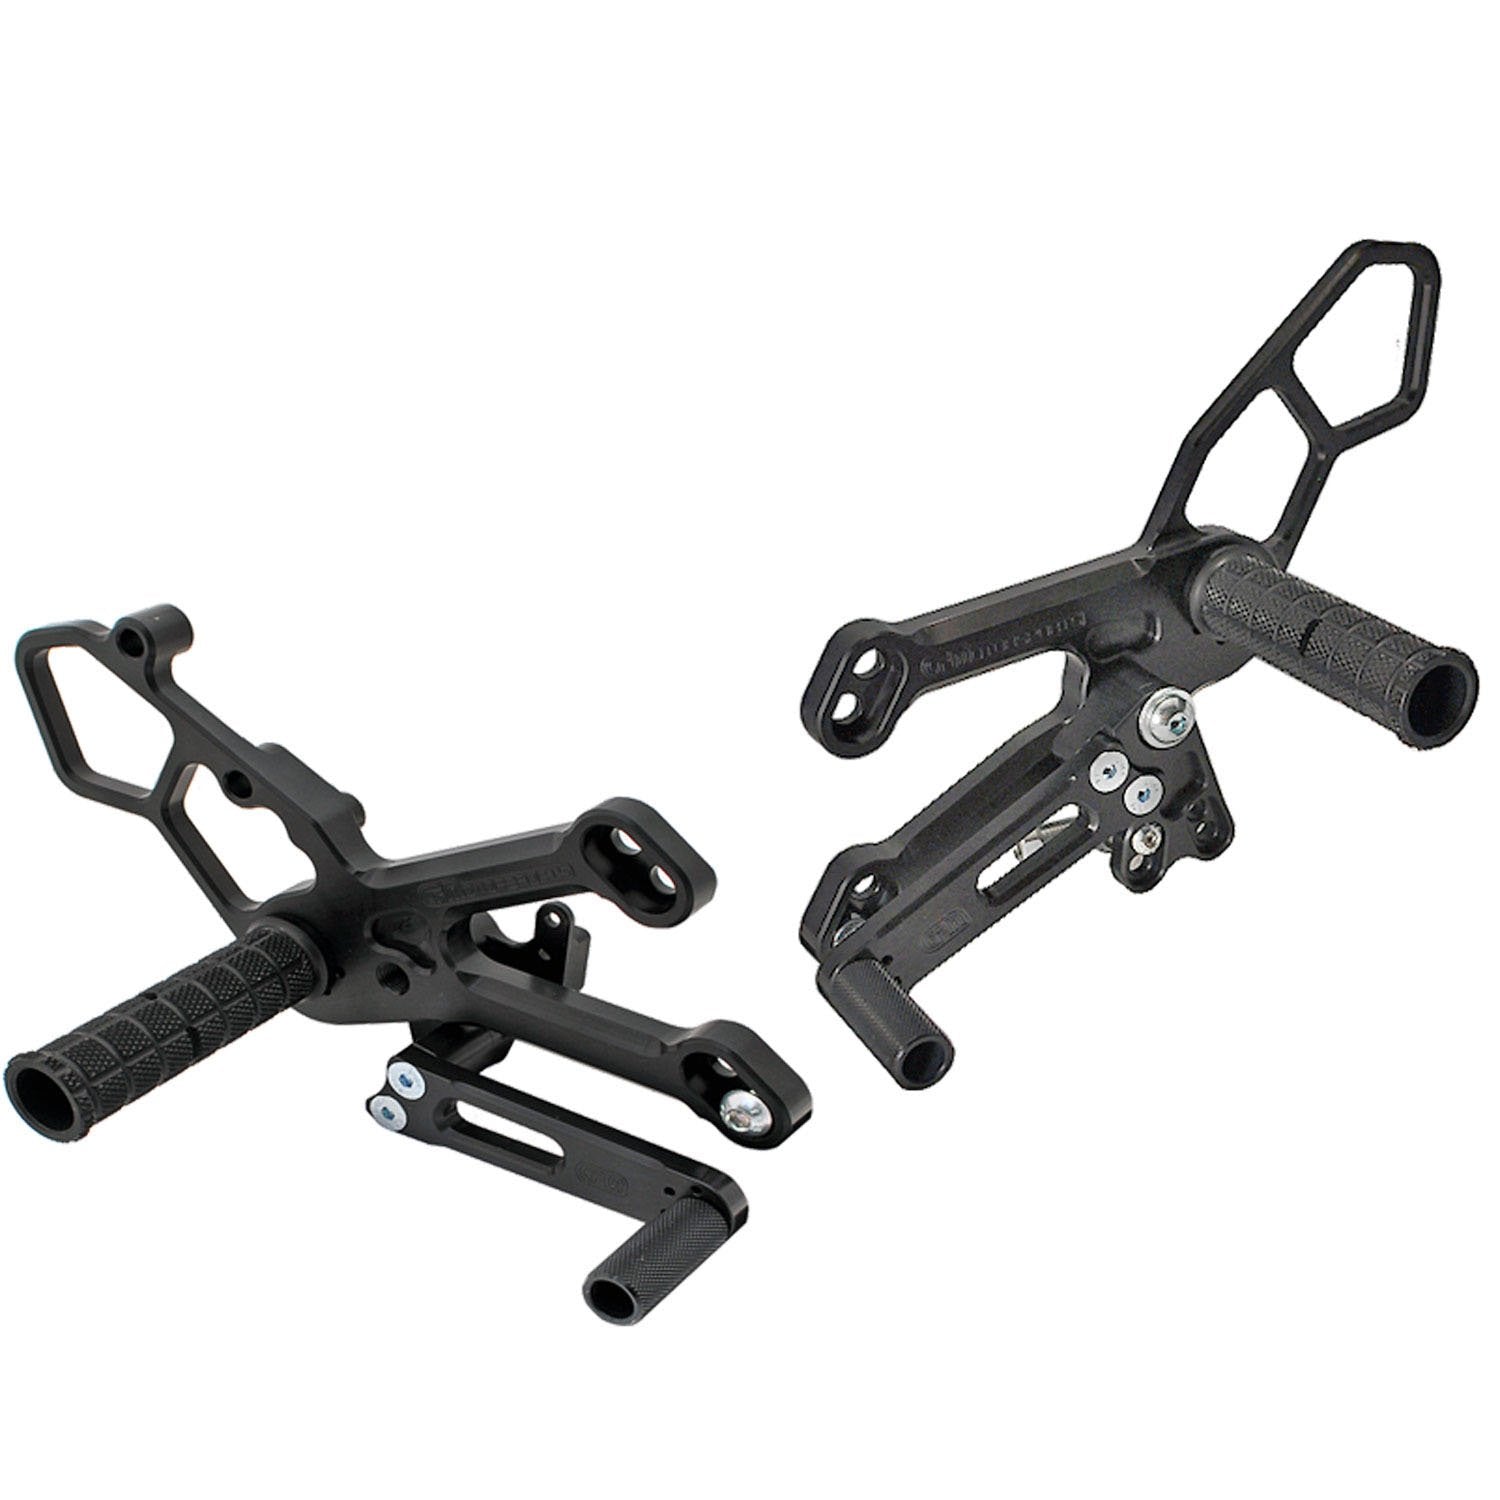 Woodcraft Yamaha R3 MT03 STD Shift Complete Rearset Kit w/ Pedals